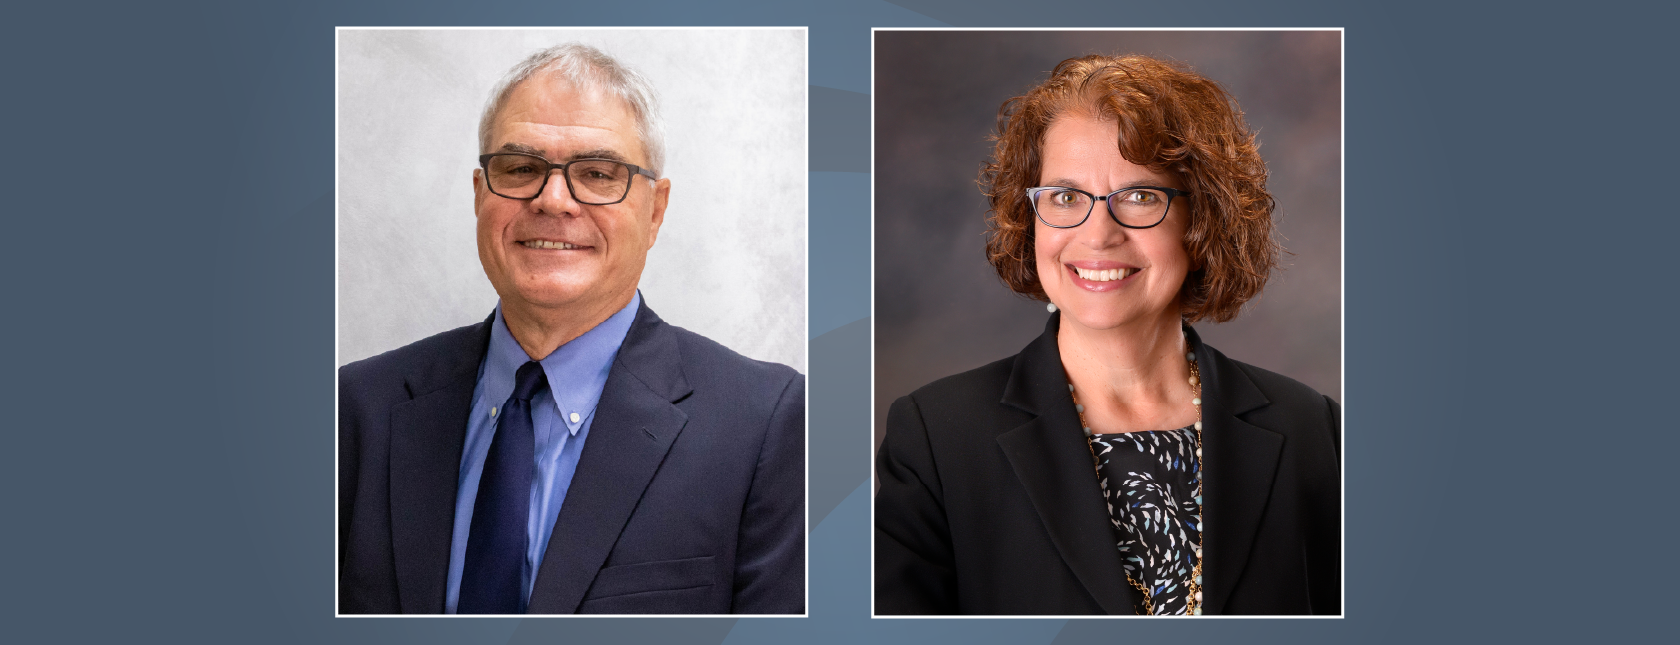 Nichols and Hopkins advance to new roles at FNB